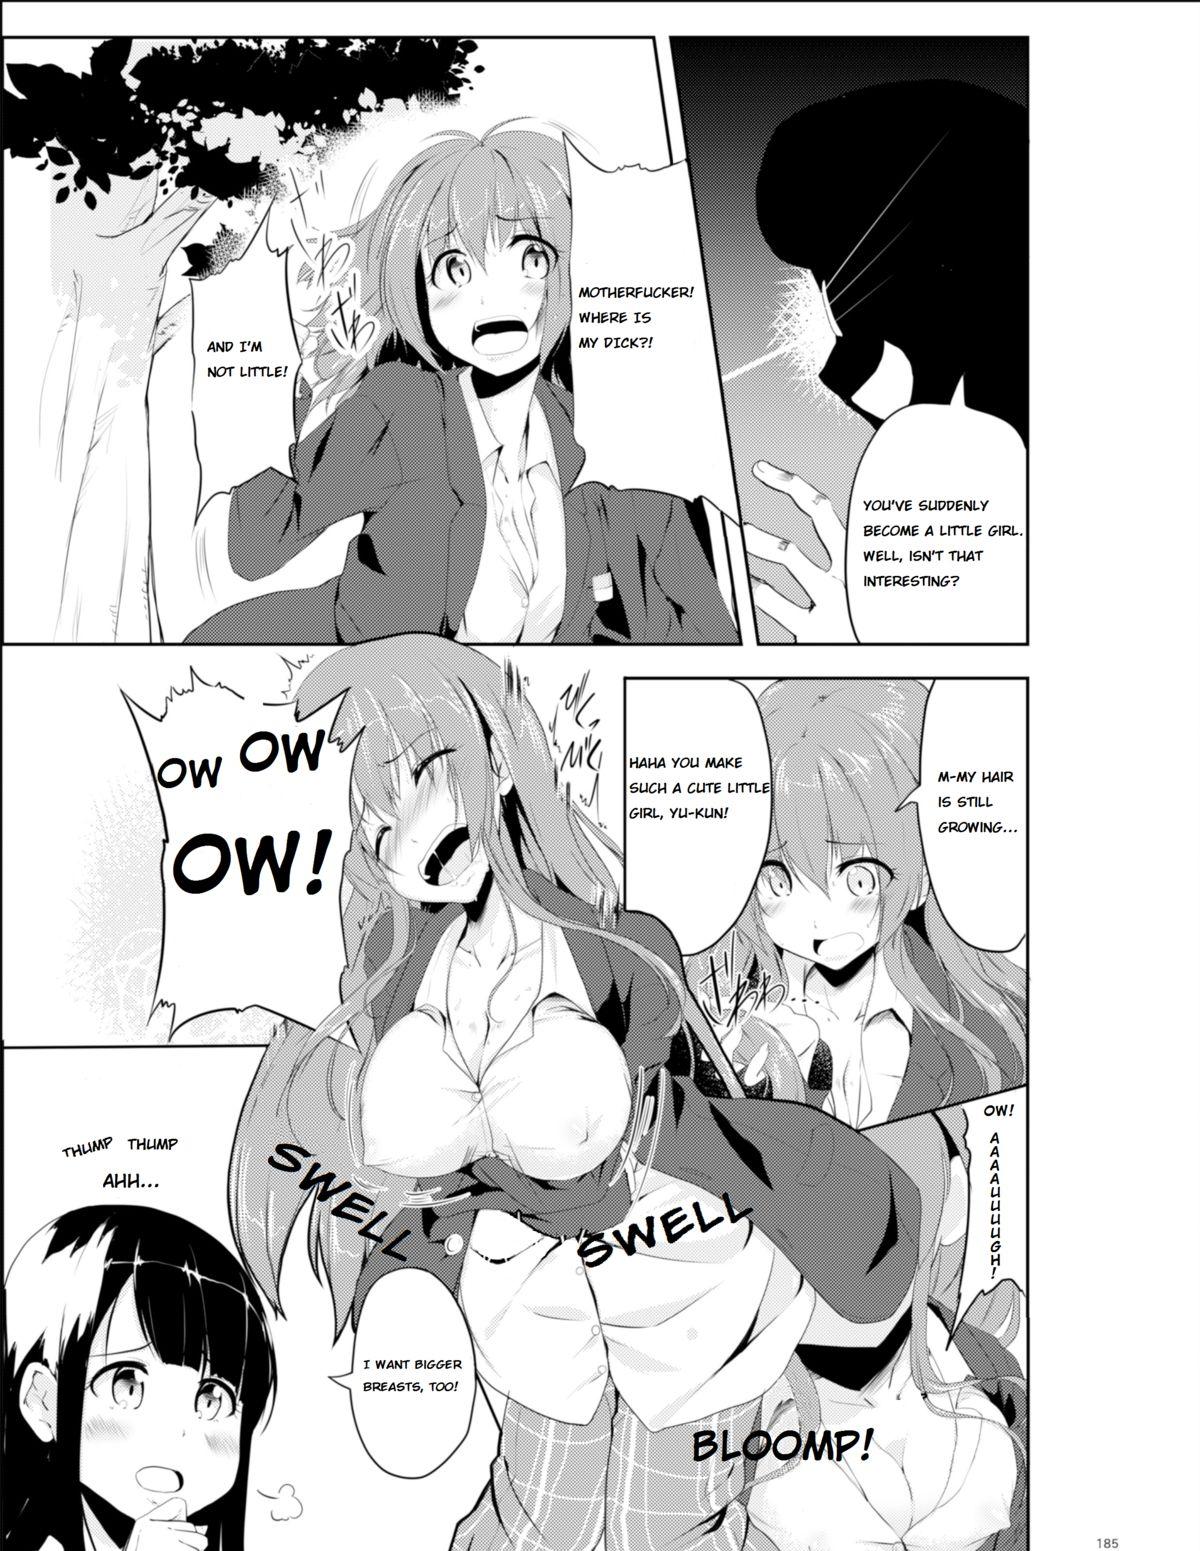 Spandex [TSF no F (Hyouga.)] "The Painted Lady" (English) - Ongoing Aunty - Page 5